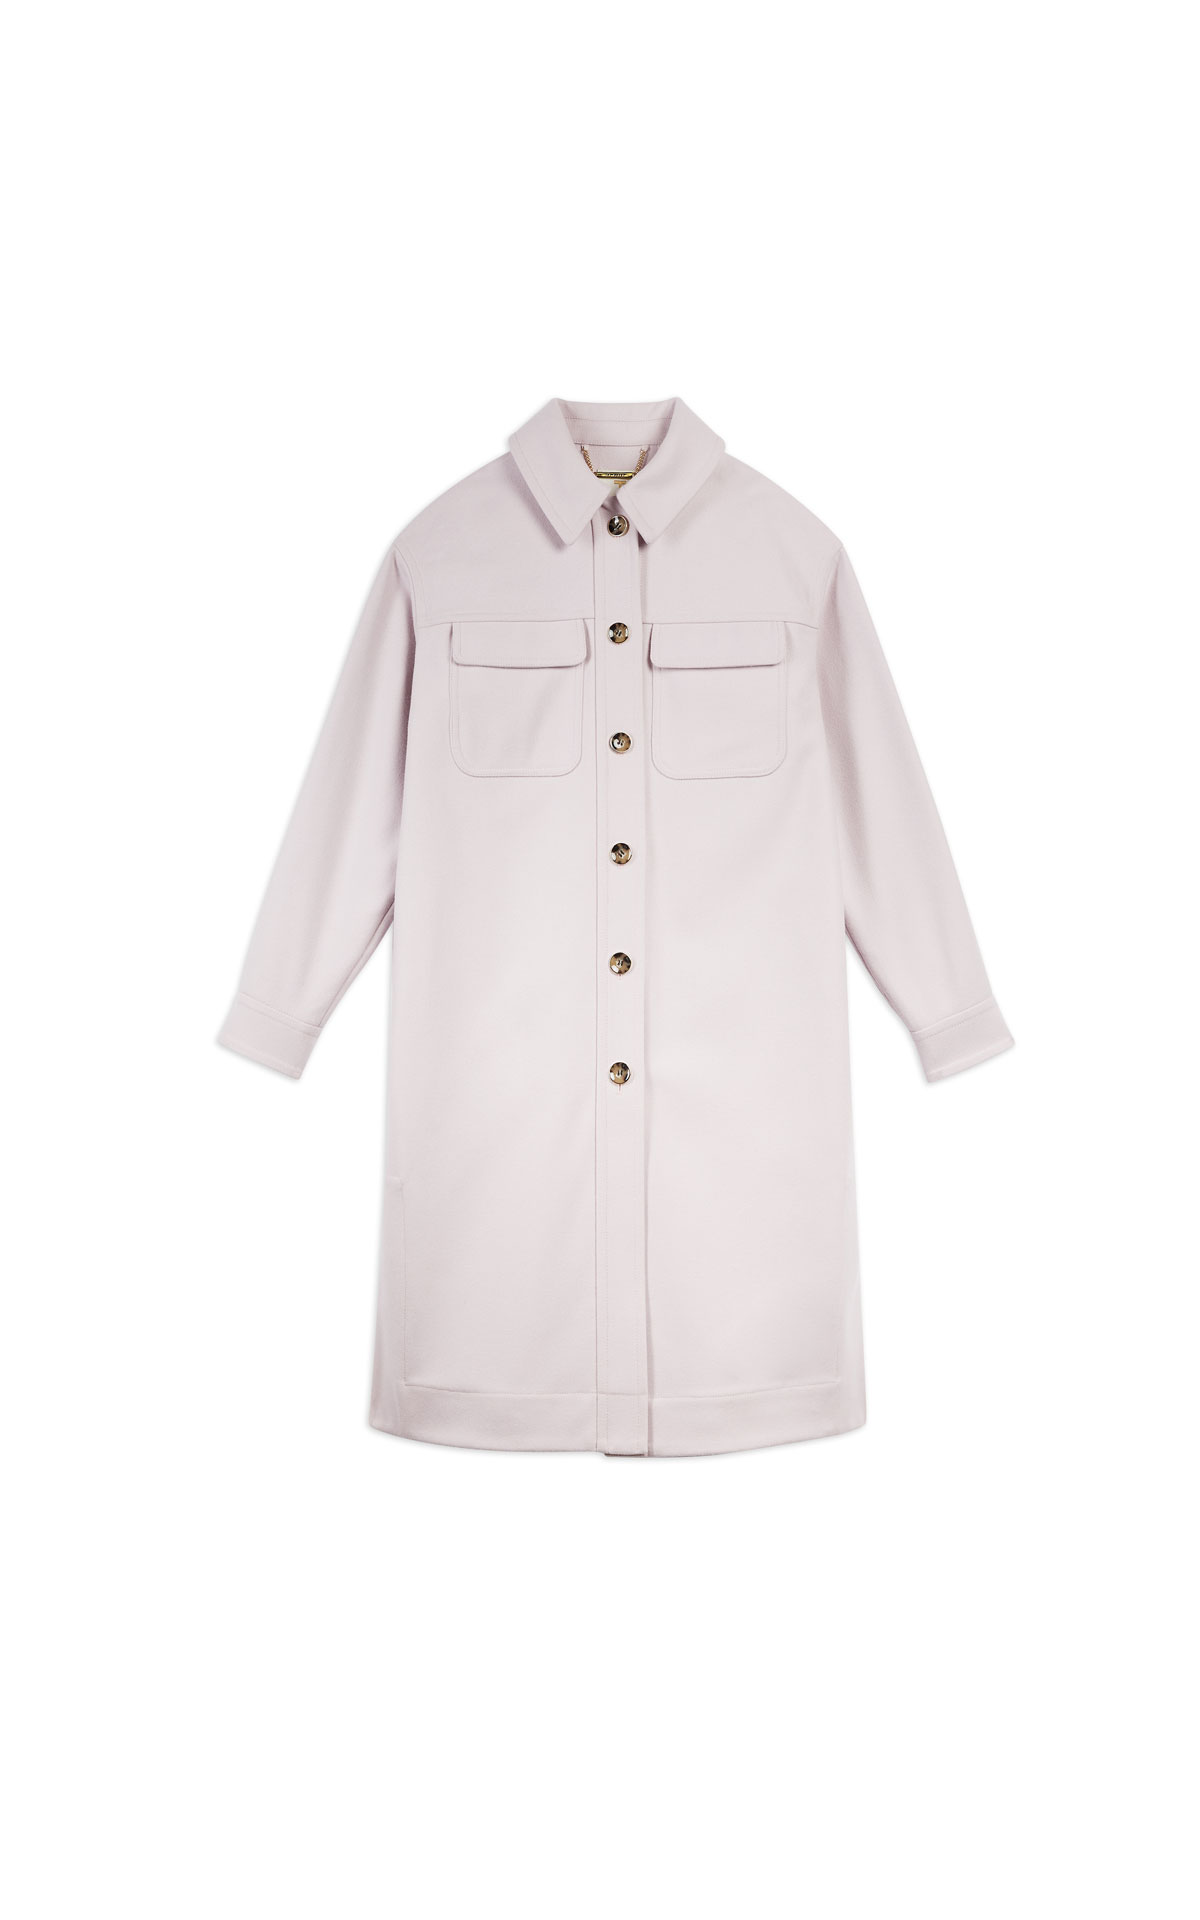 Ted Baker Utility wool blend jacket from Bicester Village